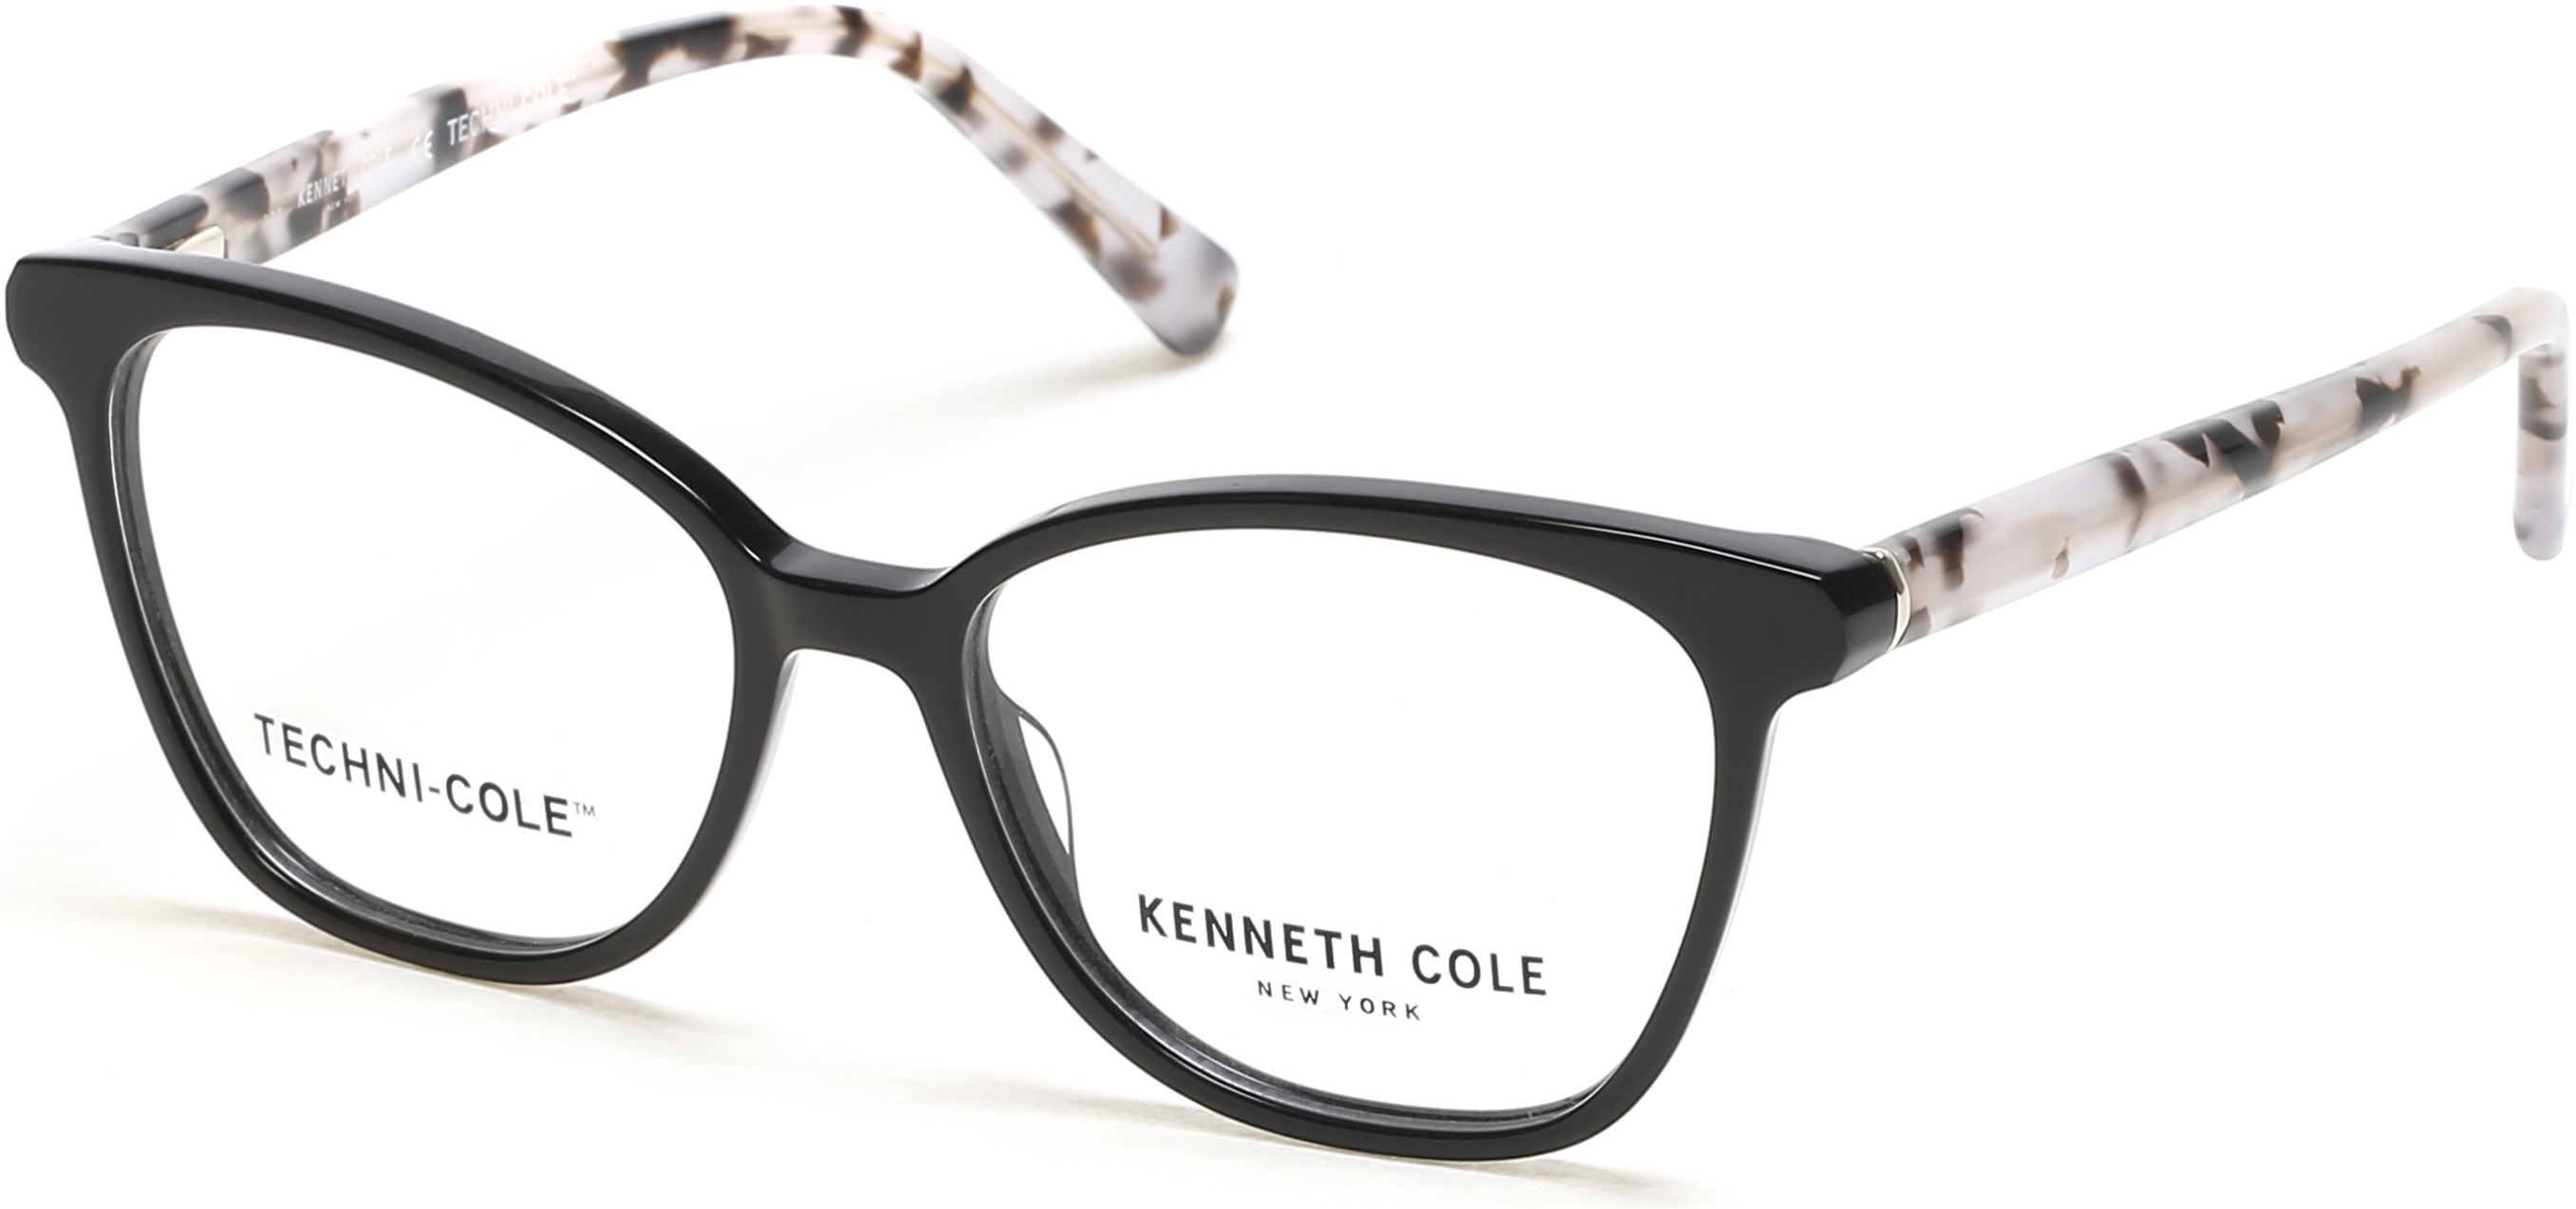 KENNETH COLE NY 0327 001